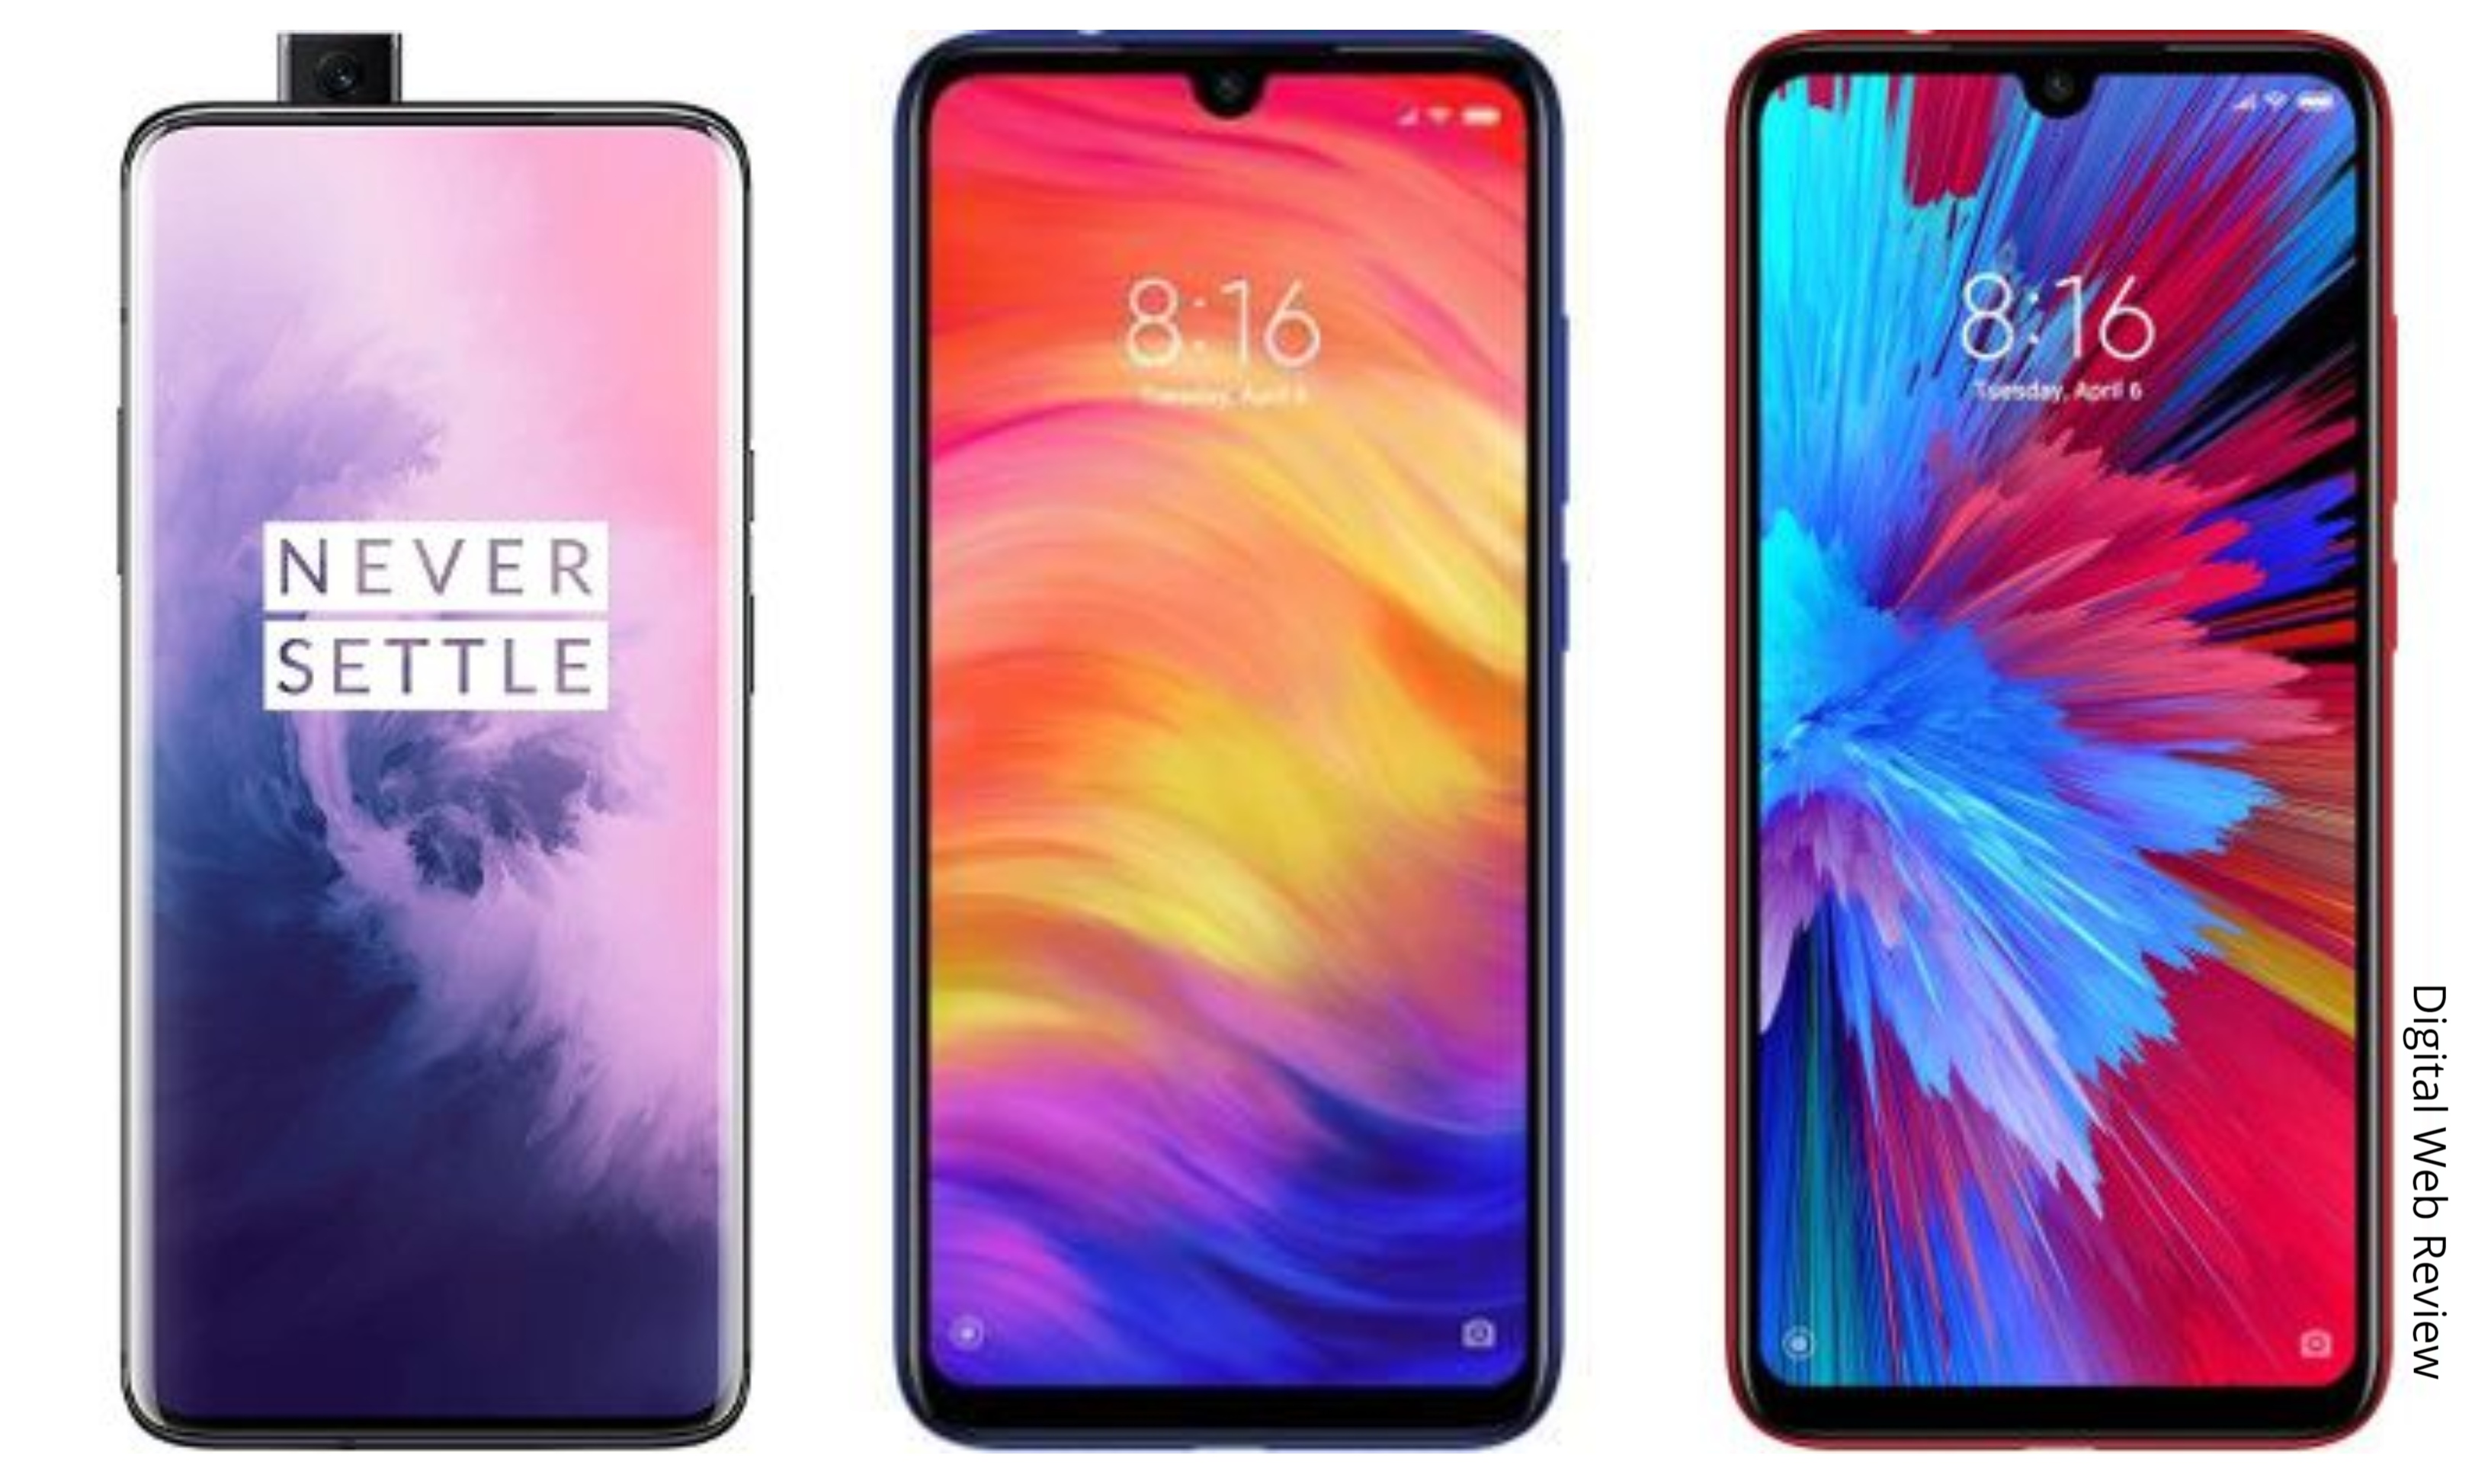 Seven Smartphones With '7' In Their Name Launched In 2019 (1)